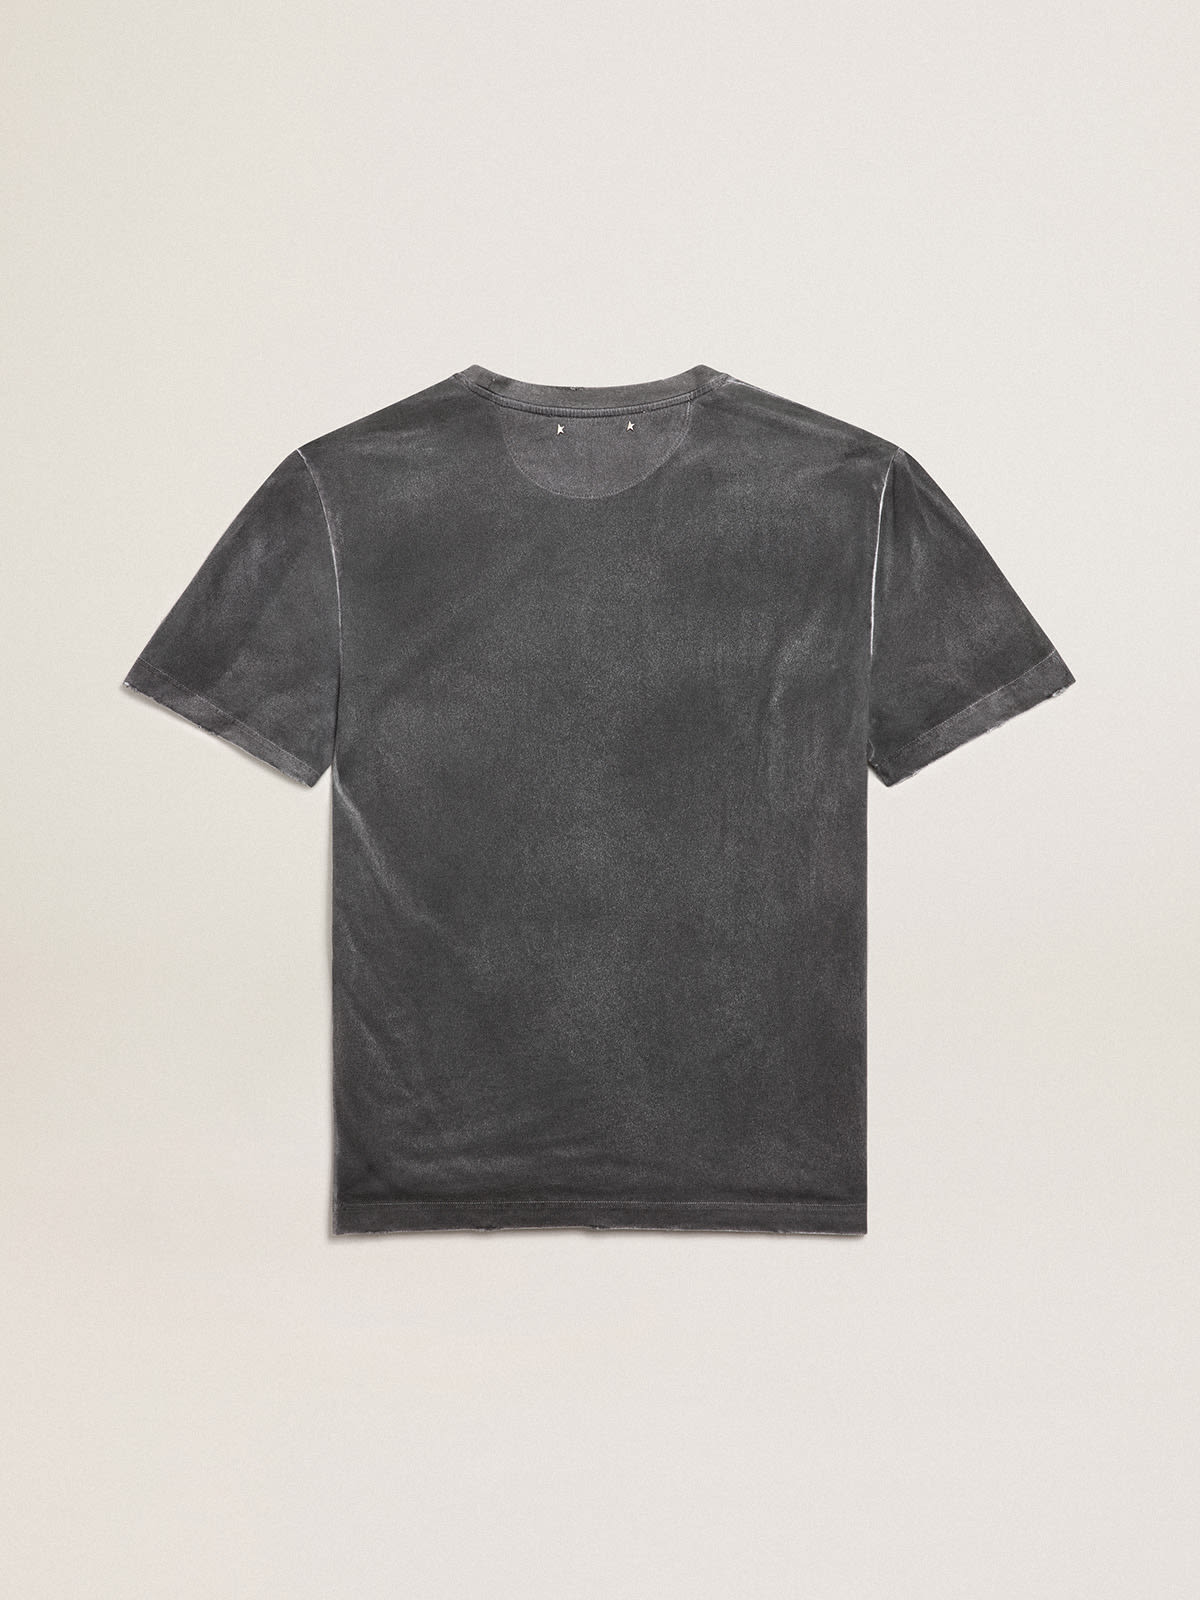 Golden Goose - Aged-look gray Journey Collection T-shirt with contrasting seagrass-colored print on the front and hand-worn areas on the edging in 